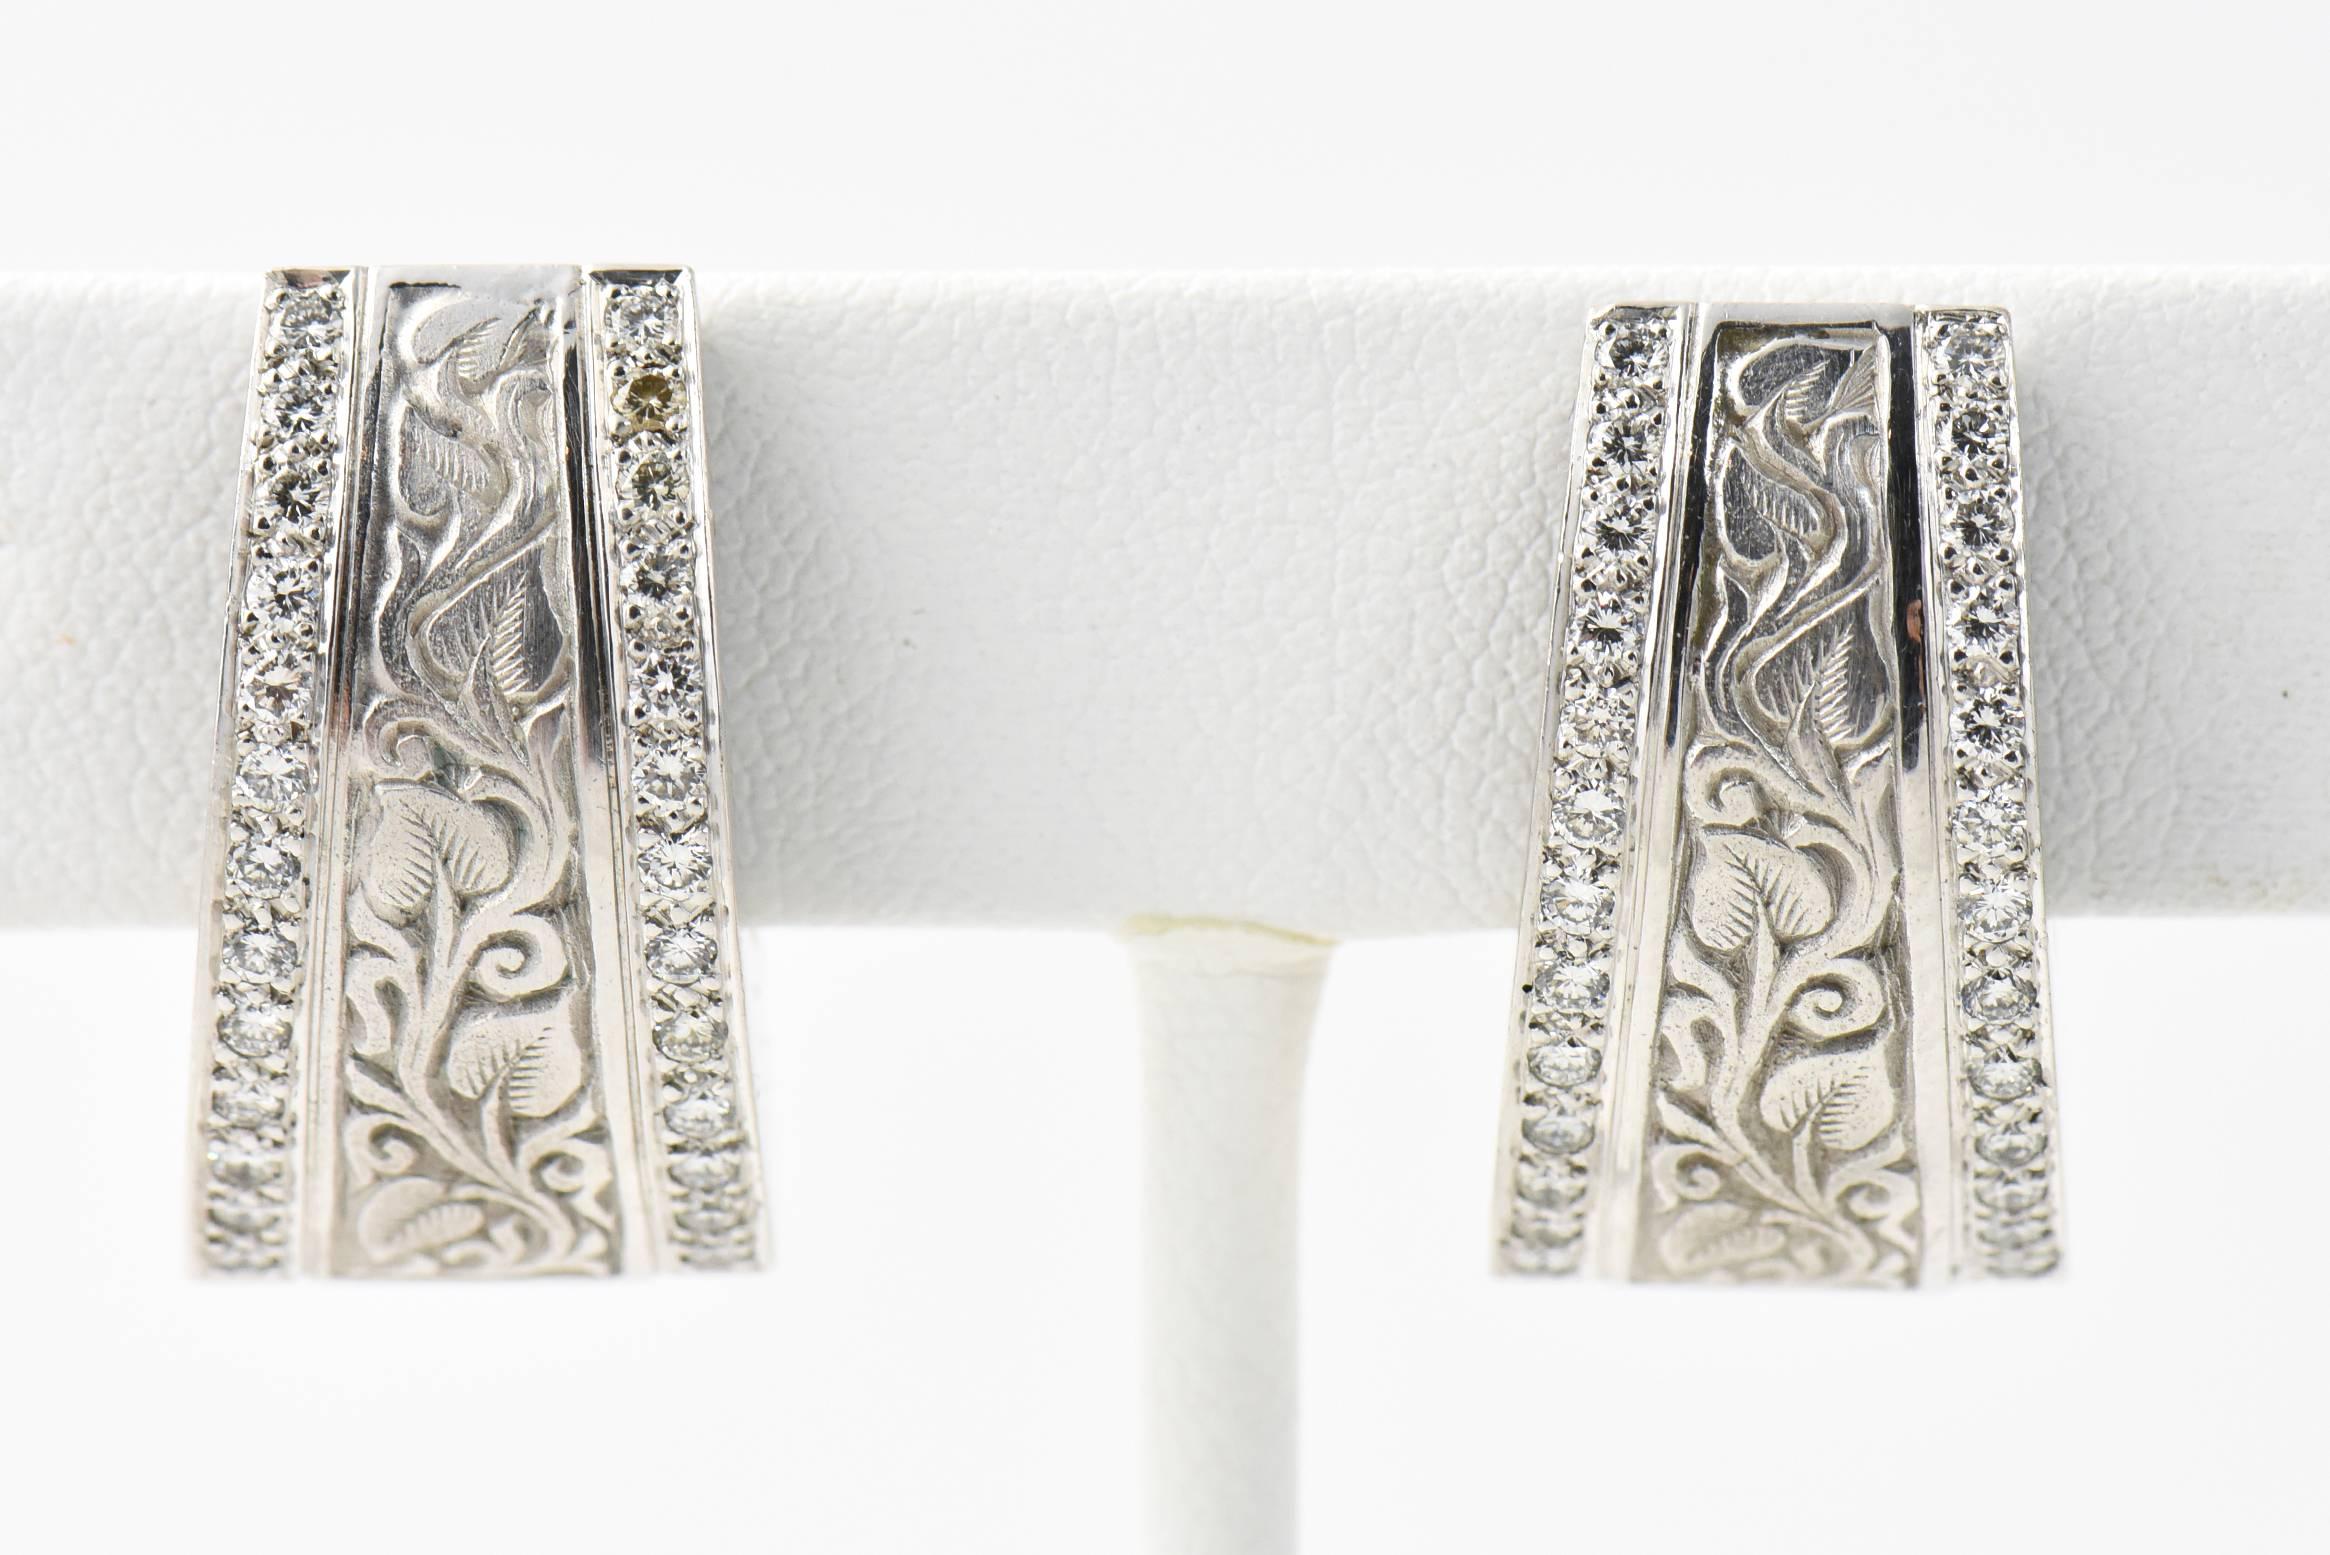 Beautifully made engraved 18k white gold hoop earrings with a leaf and vine design and pave diamond edges.

They have English hallmarks and an SW mark which I believe might be for the Jeweler Simon Wright.